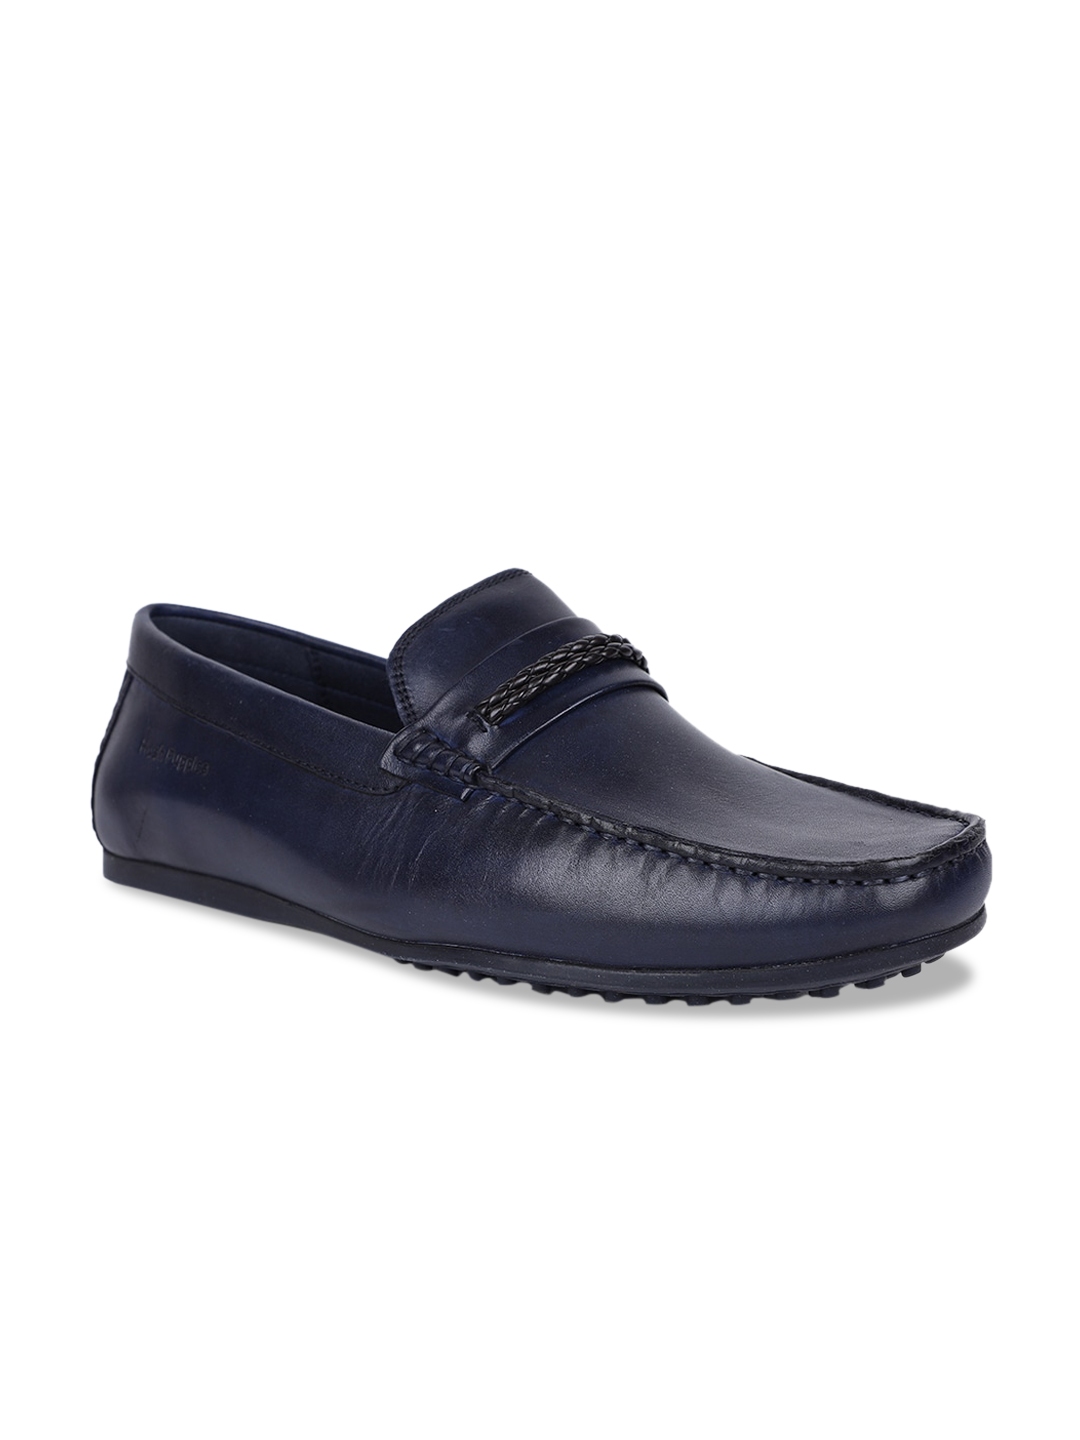 Buy Hush Puppies Men Navy Blue Leather Loafers - Casual Shoes for Men ...